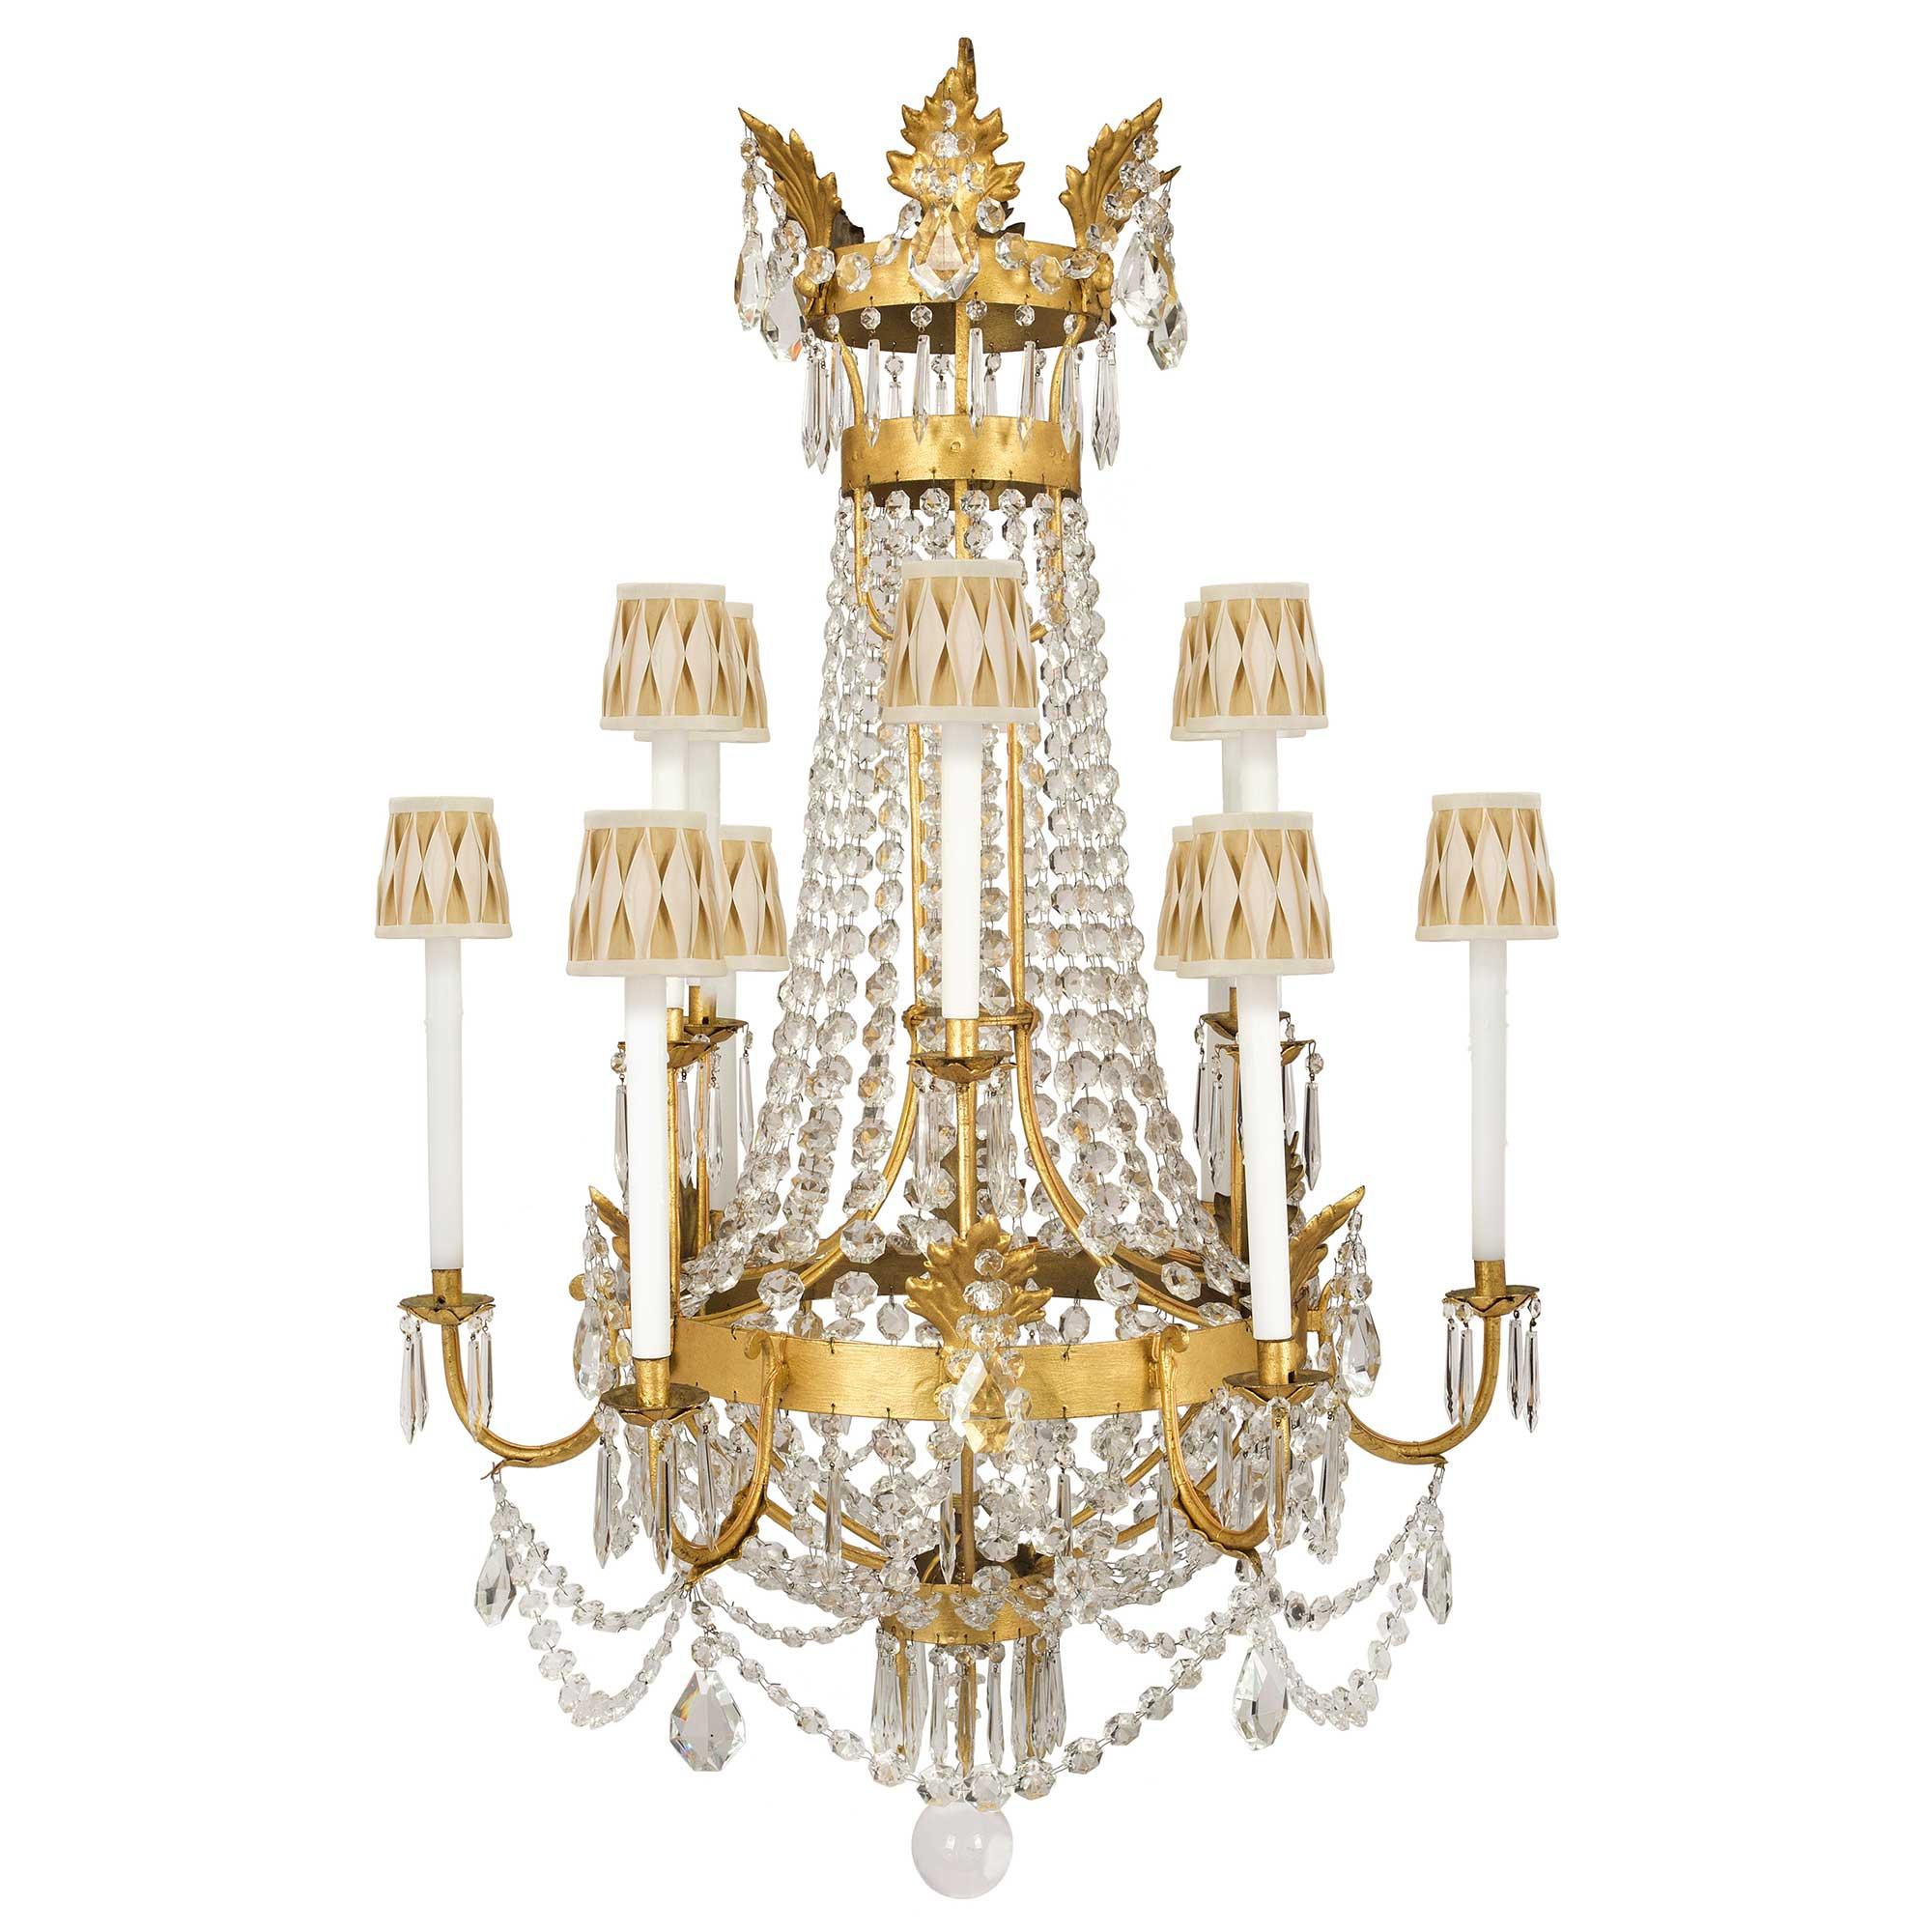 A fabulous pair of Italian 19th century Baccarat crystal and gilt iron twelve light chandelier. Each chandelier is centered by a beautiful solid crystal ball amidst most decorative prism shaped cut crystal pendants. Above beautiful circular cut